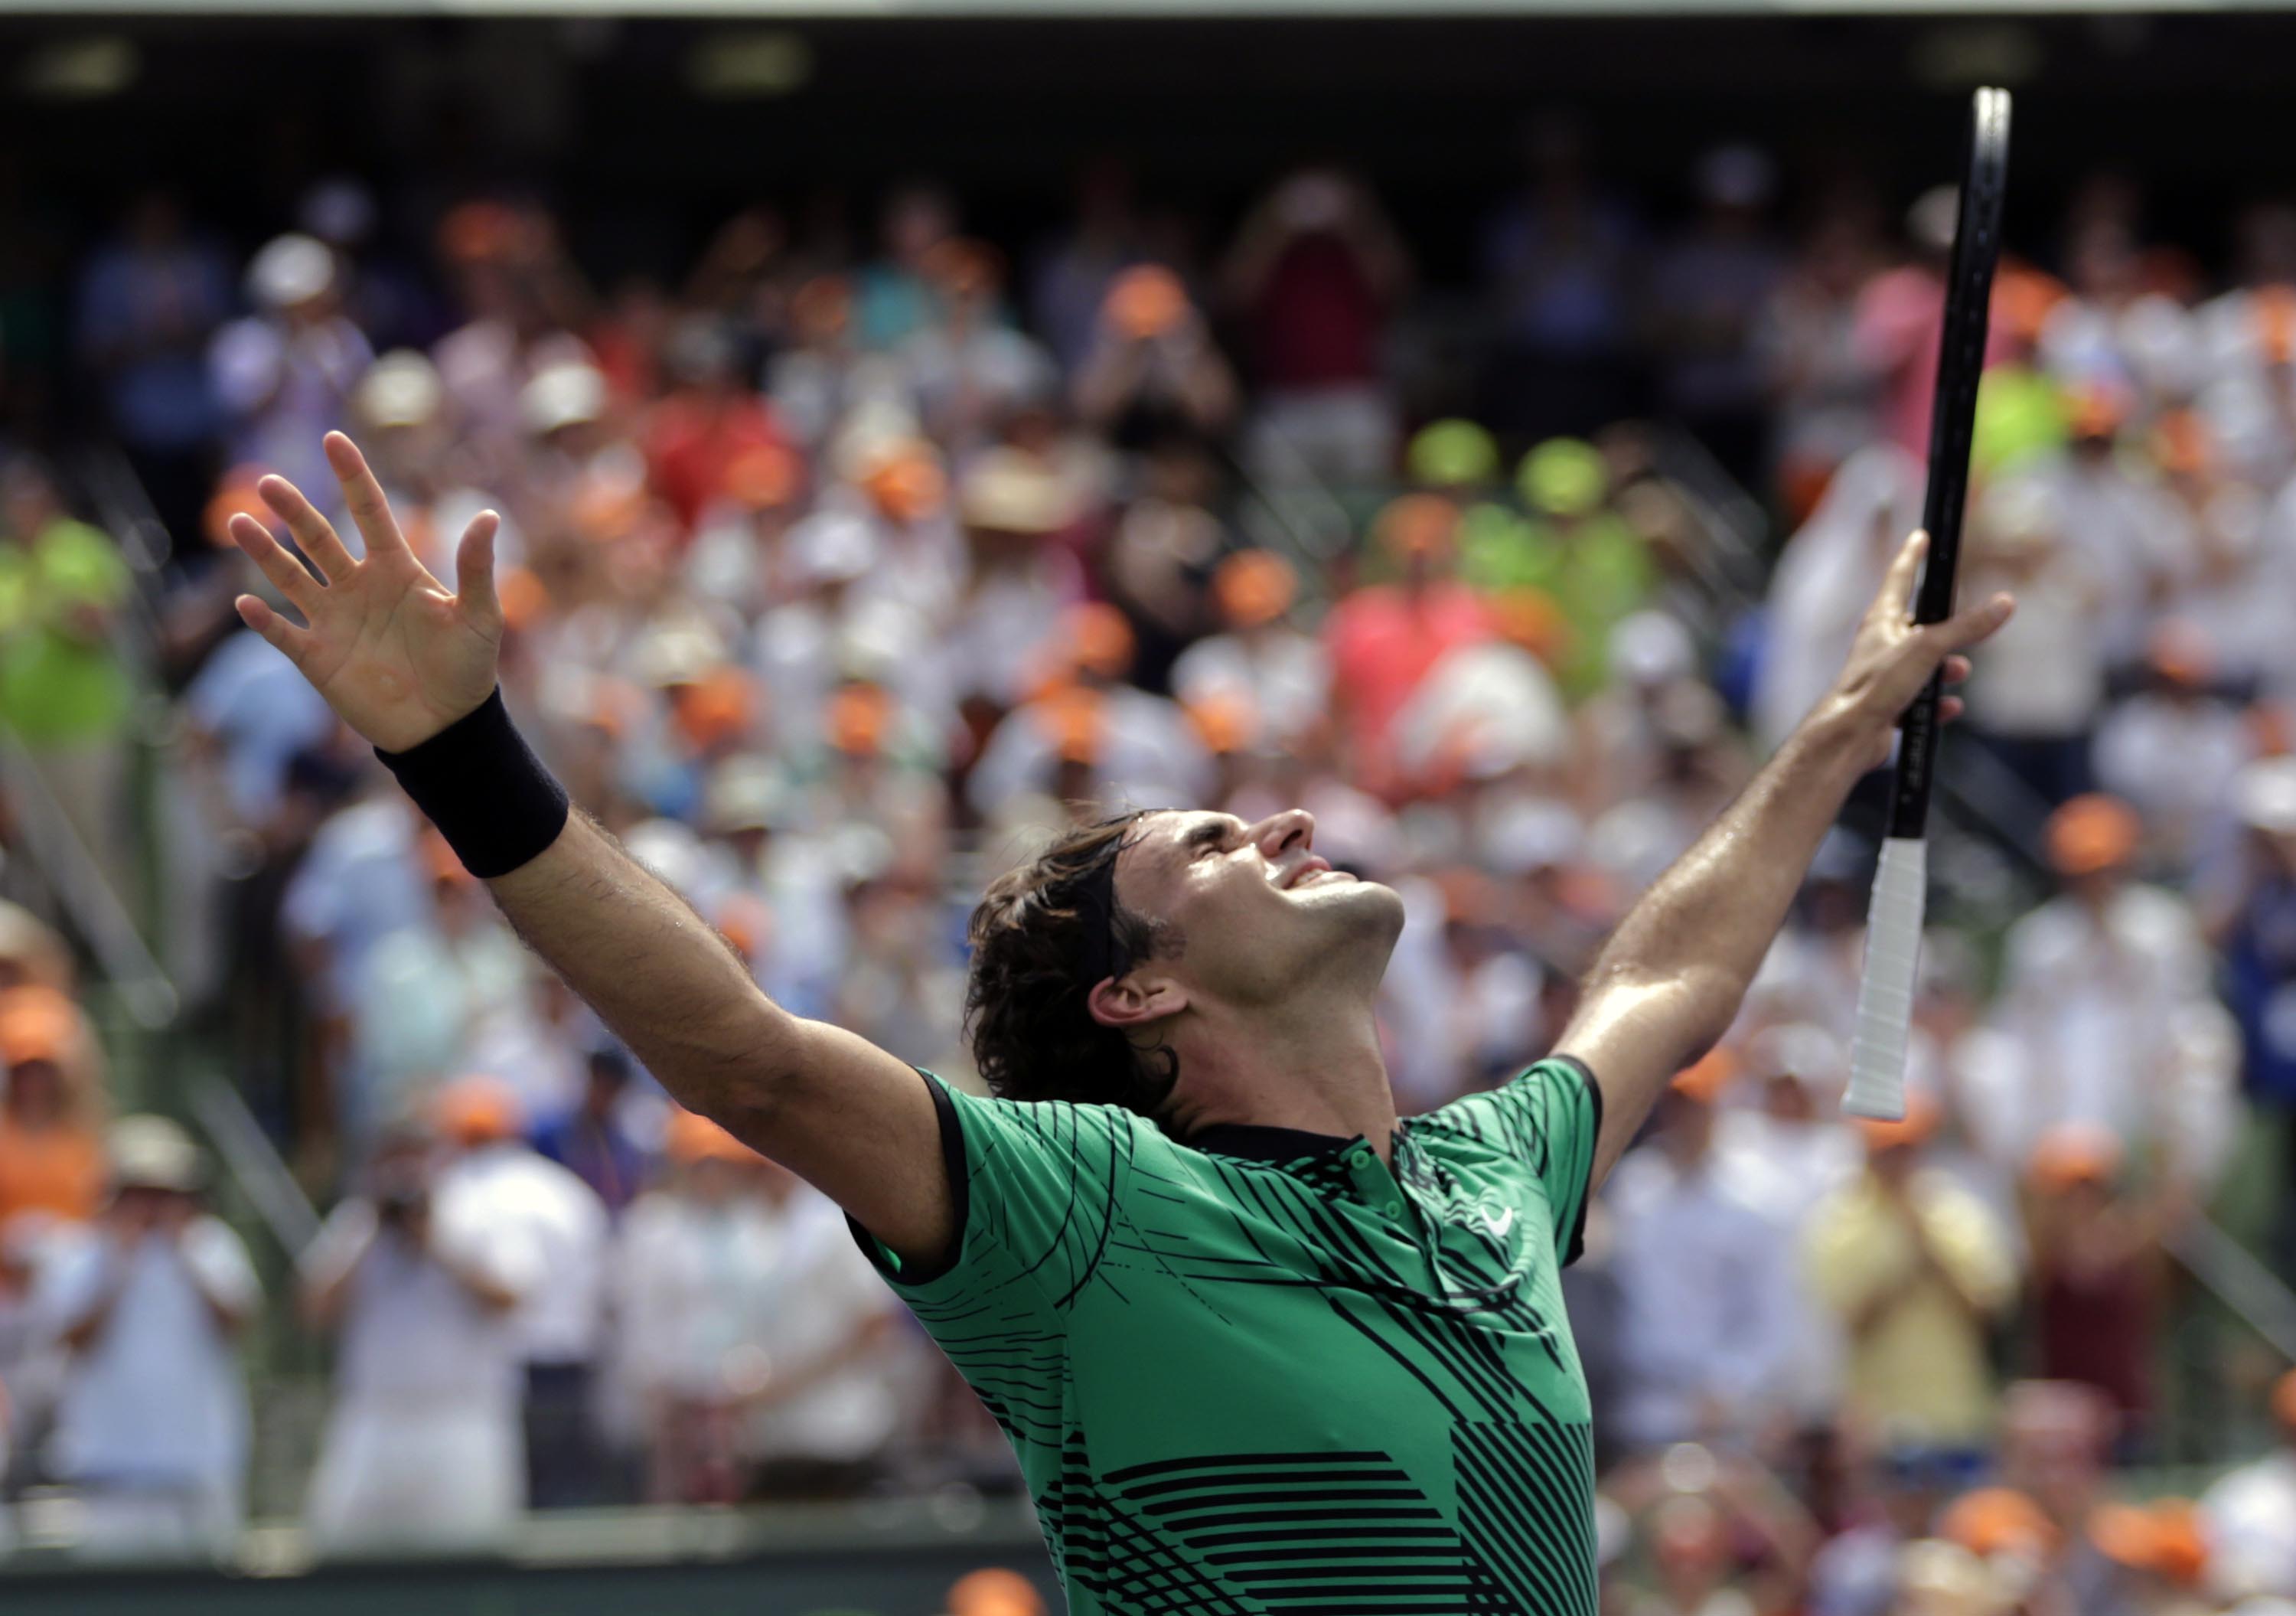 Roger Federer, of Switzerland, celebrates after defeating Rafael Nadal, of Spain, in the men's singles final at the Miami Open tennis tournament, in  Key Biscayne, Florida, on Sunday, April 2, 2017. Photo: AP